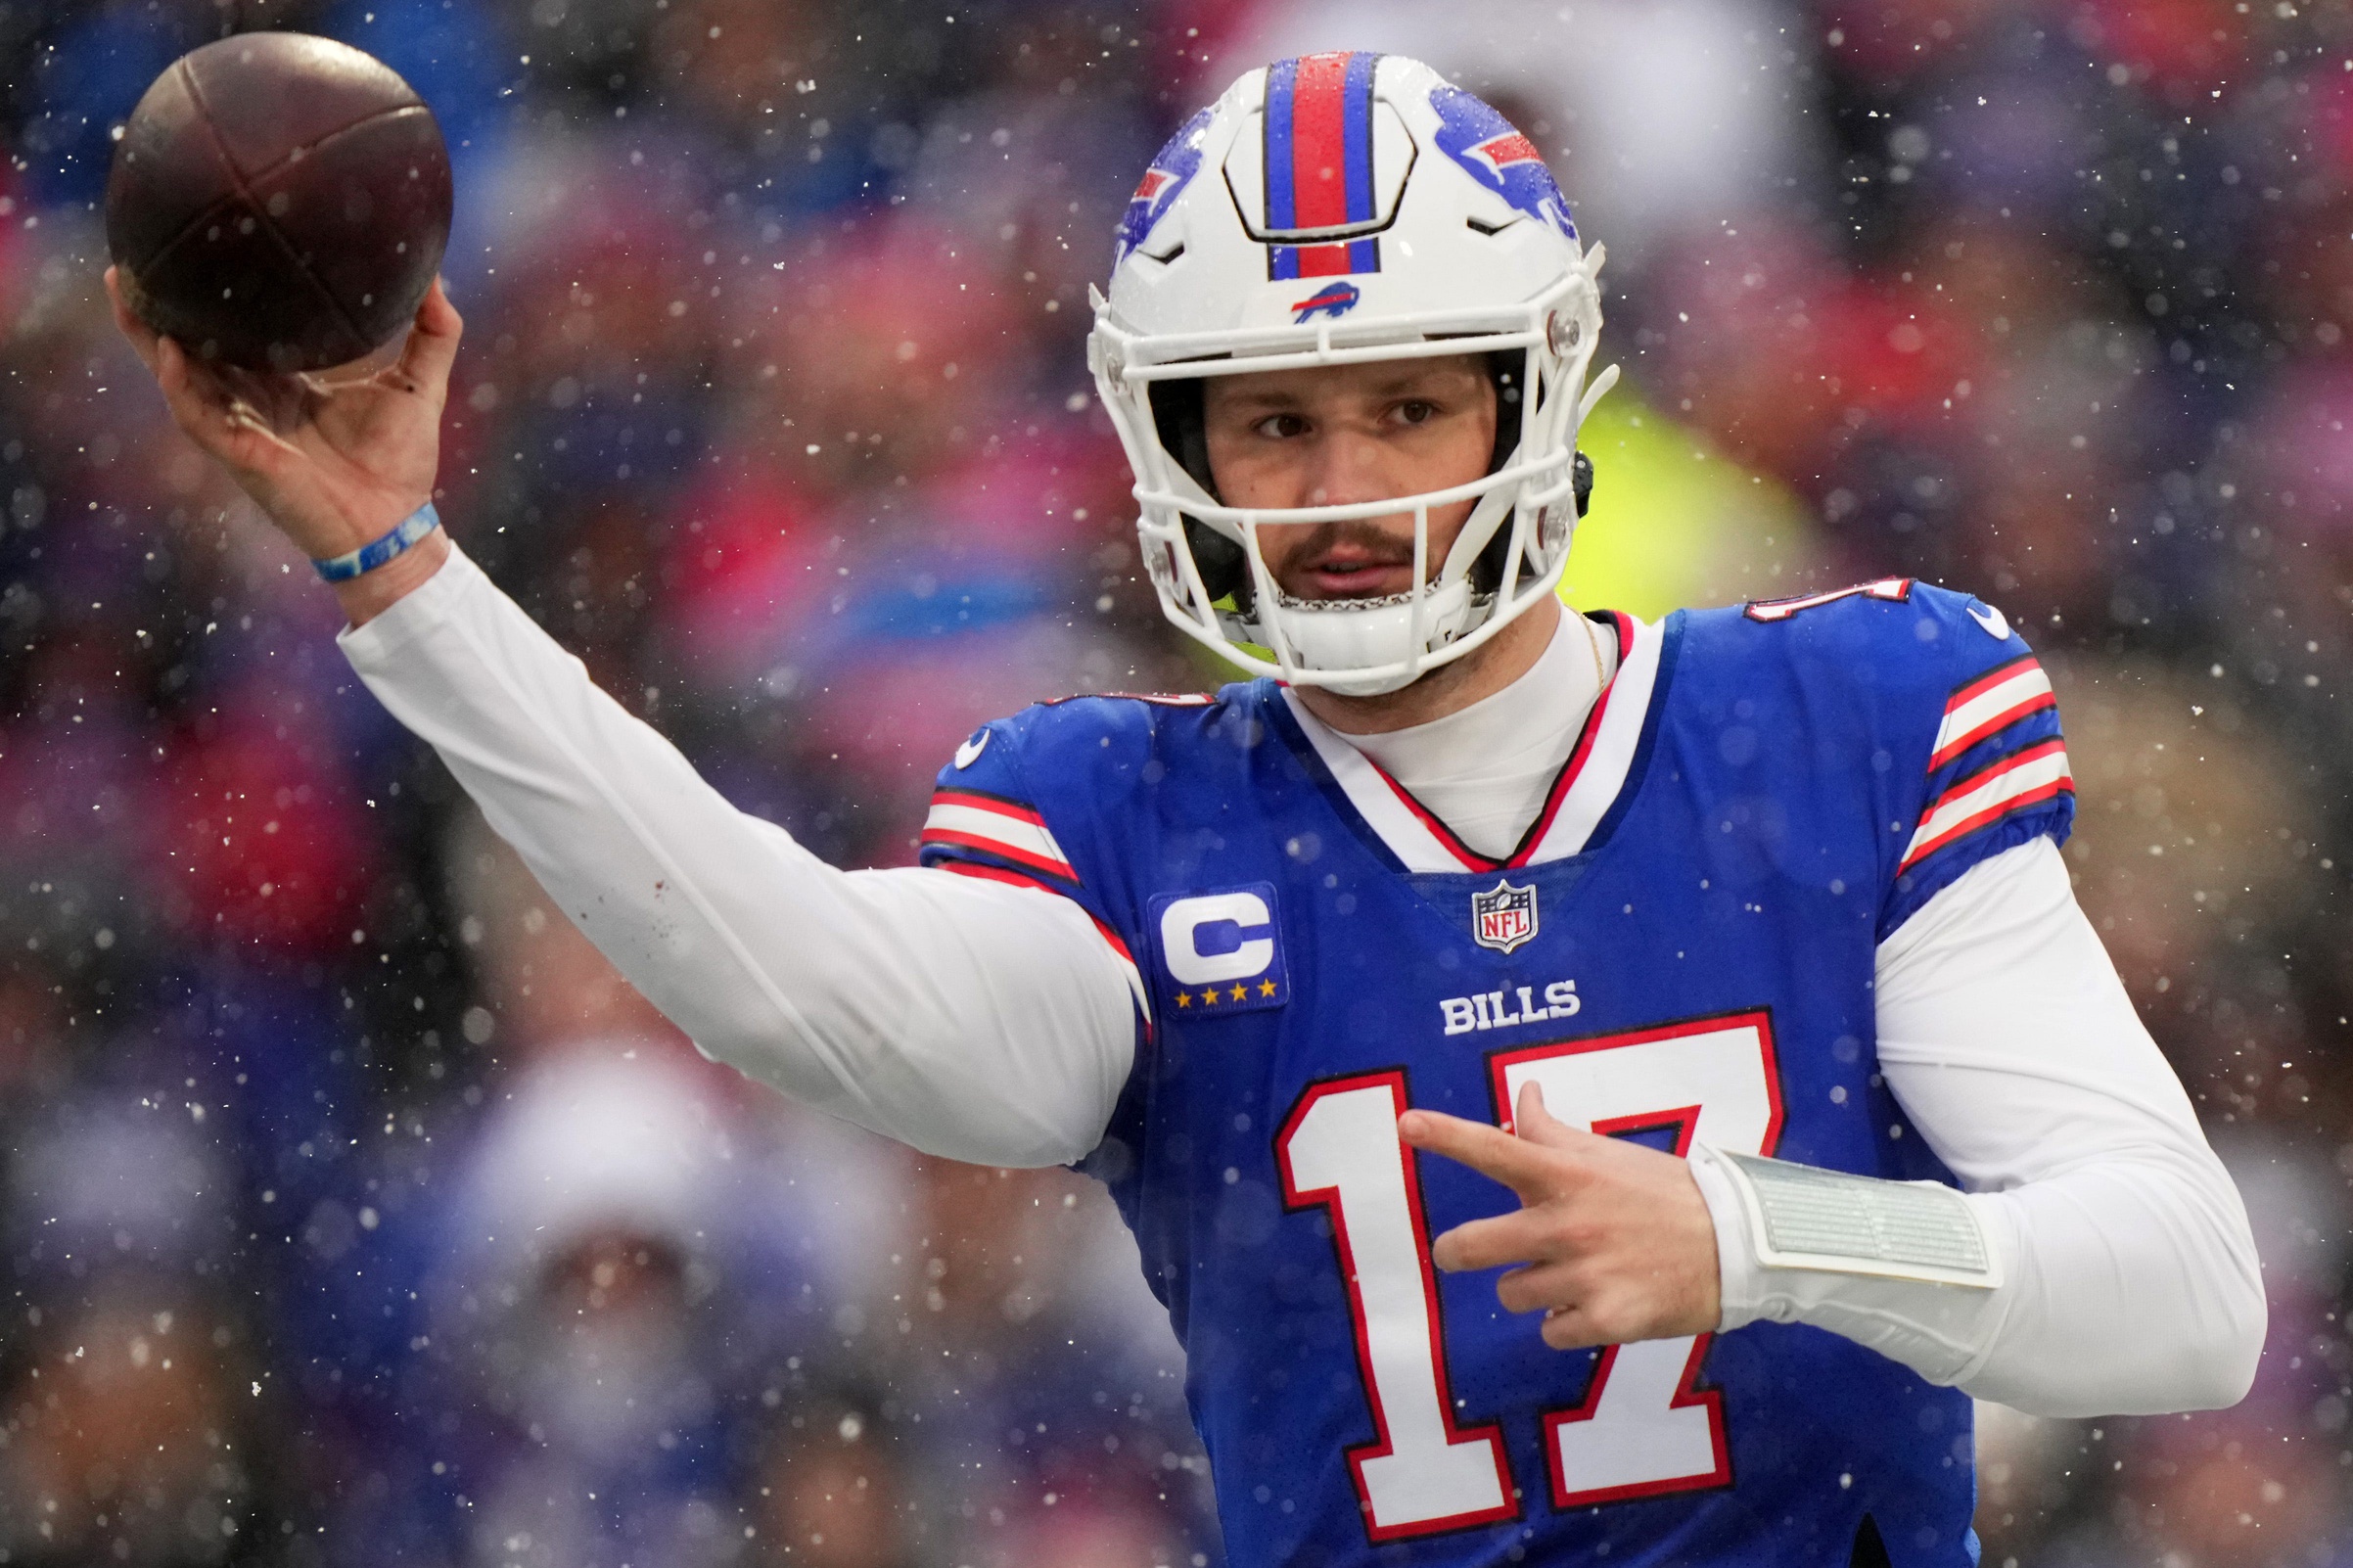 Buffalo Bills Super Bowl Odds: What Are the Bills Chances of